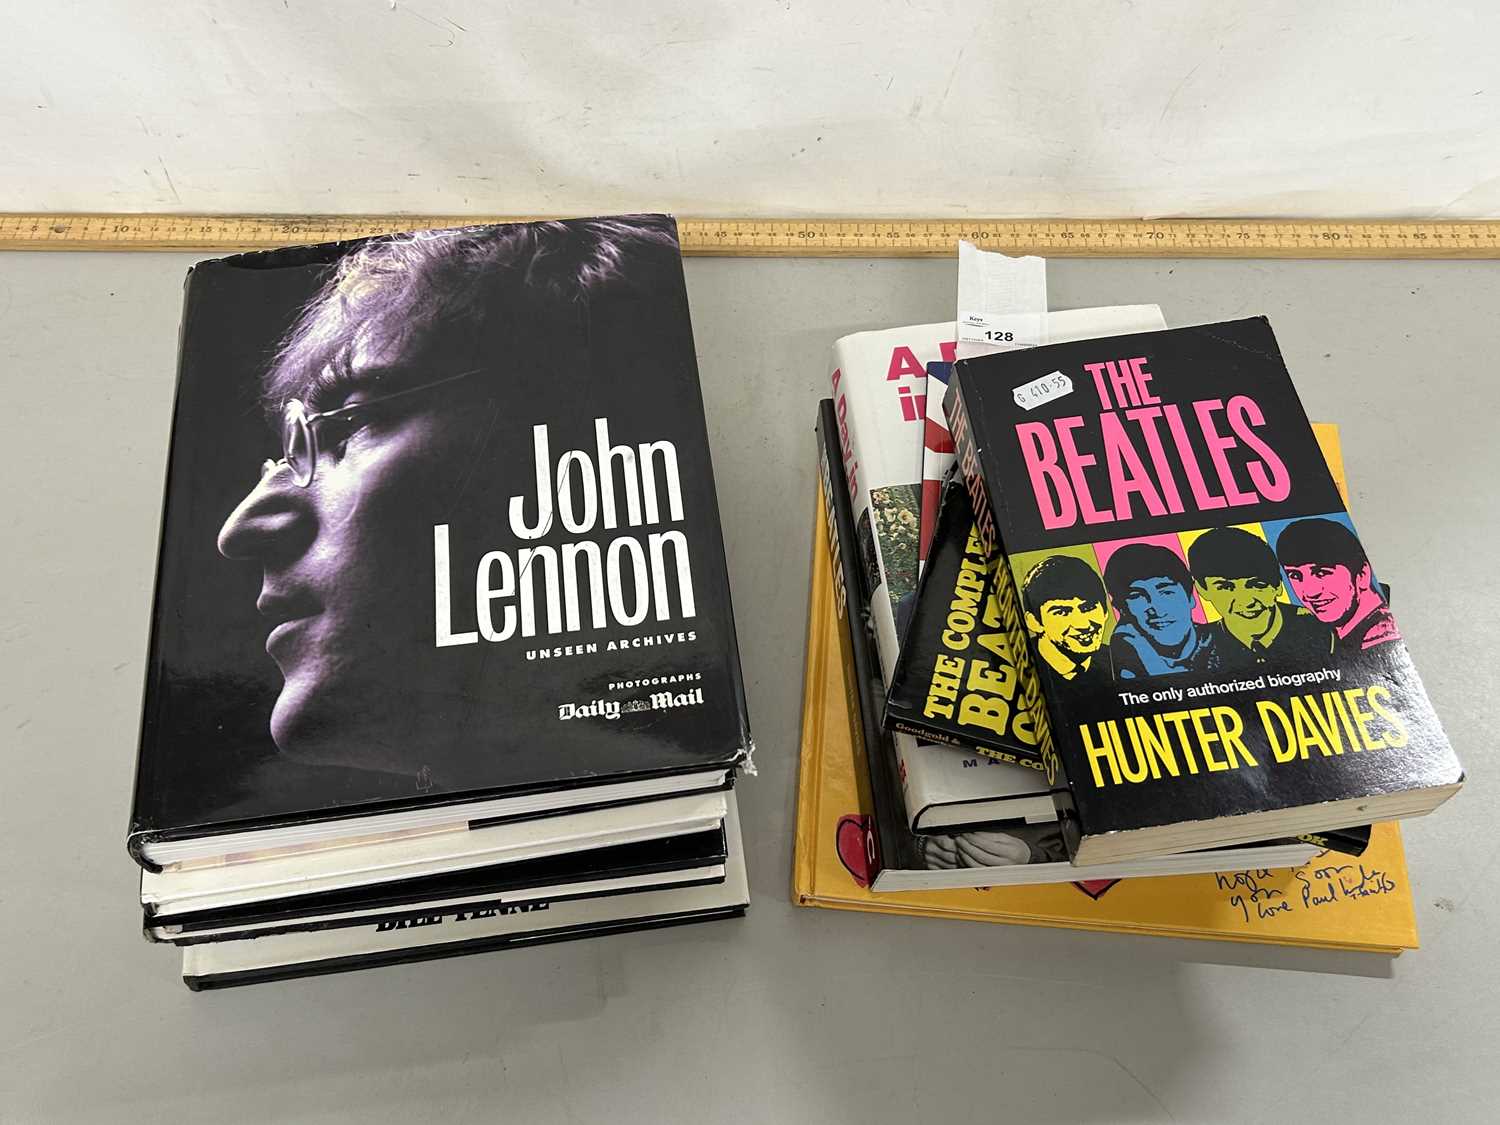 A collection of books on The Beatles